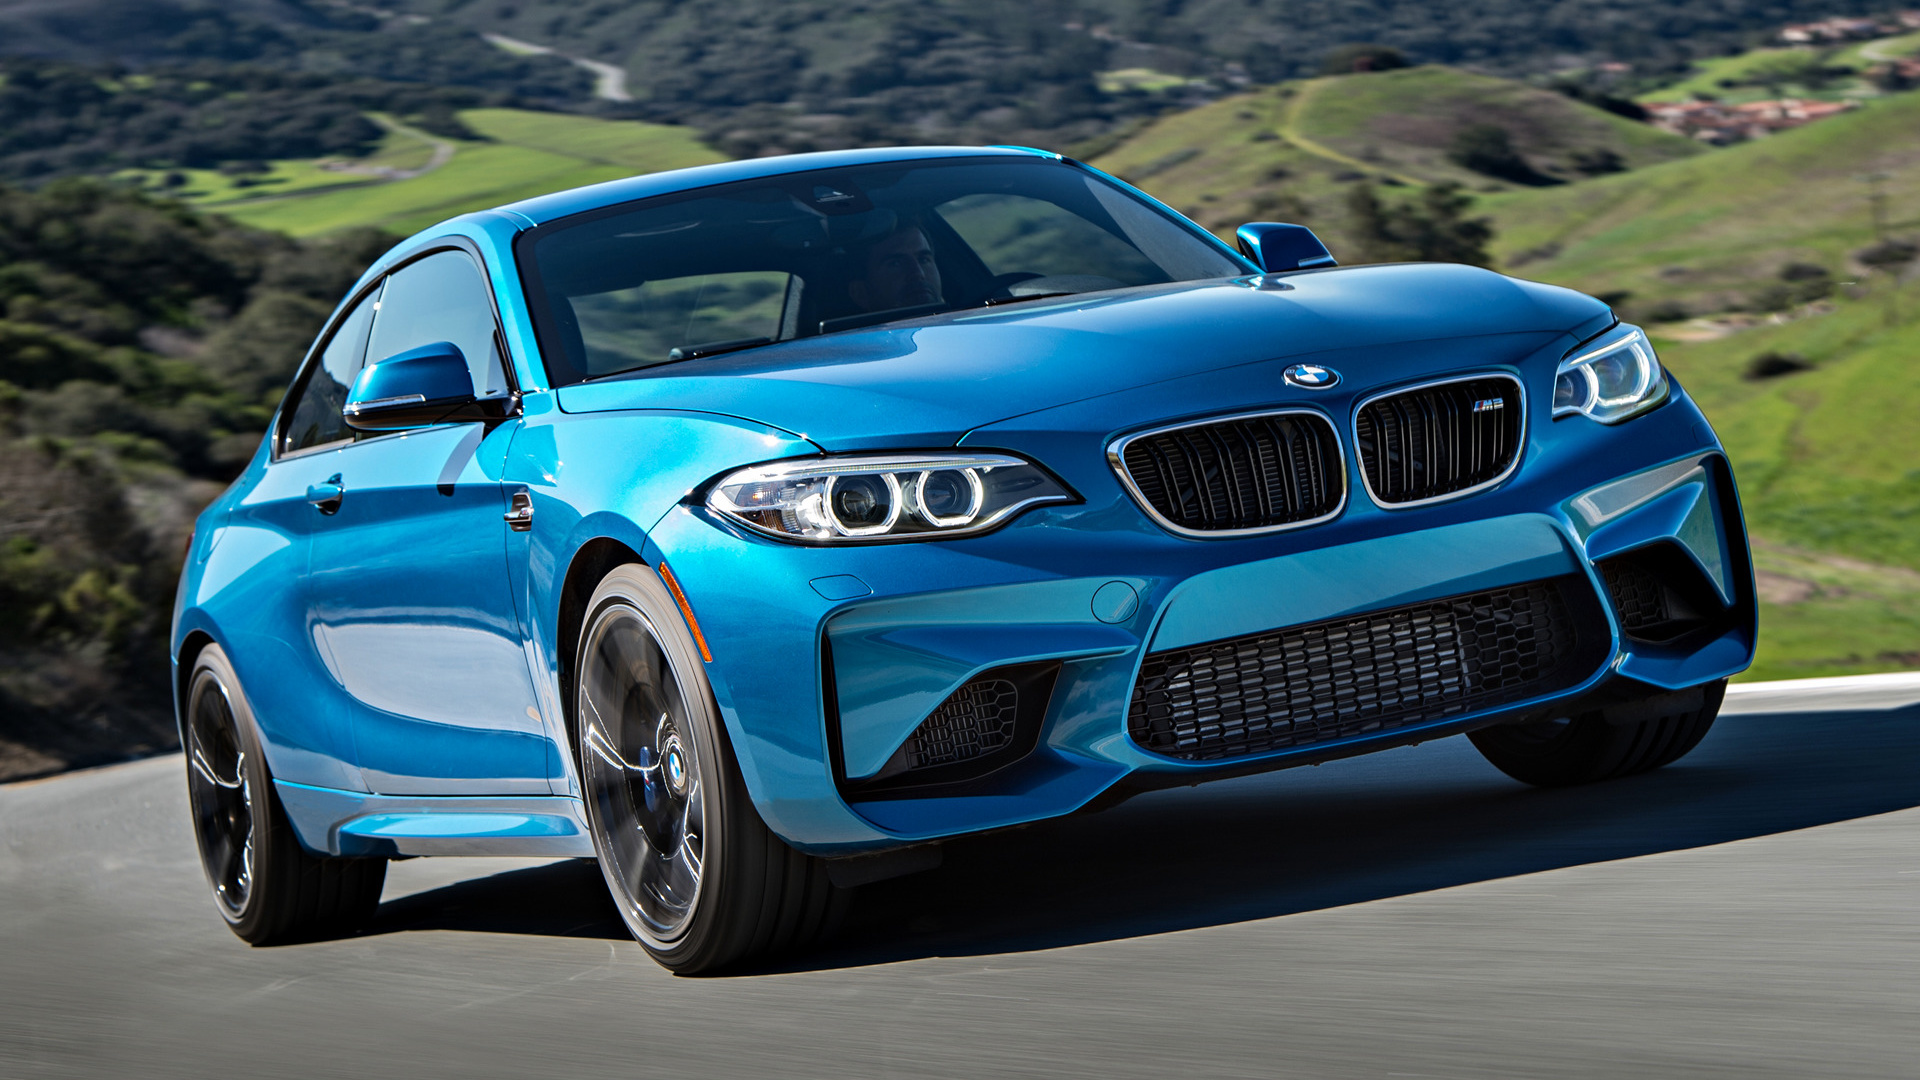 BMW M2 Coupe 2016 US Wallpapers and HD Images   Car Pixel